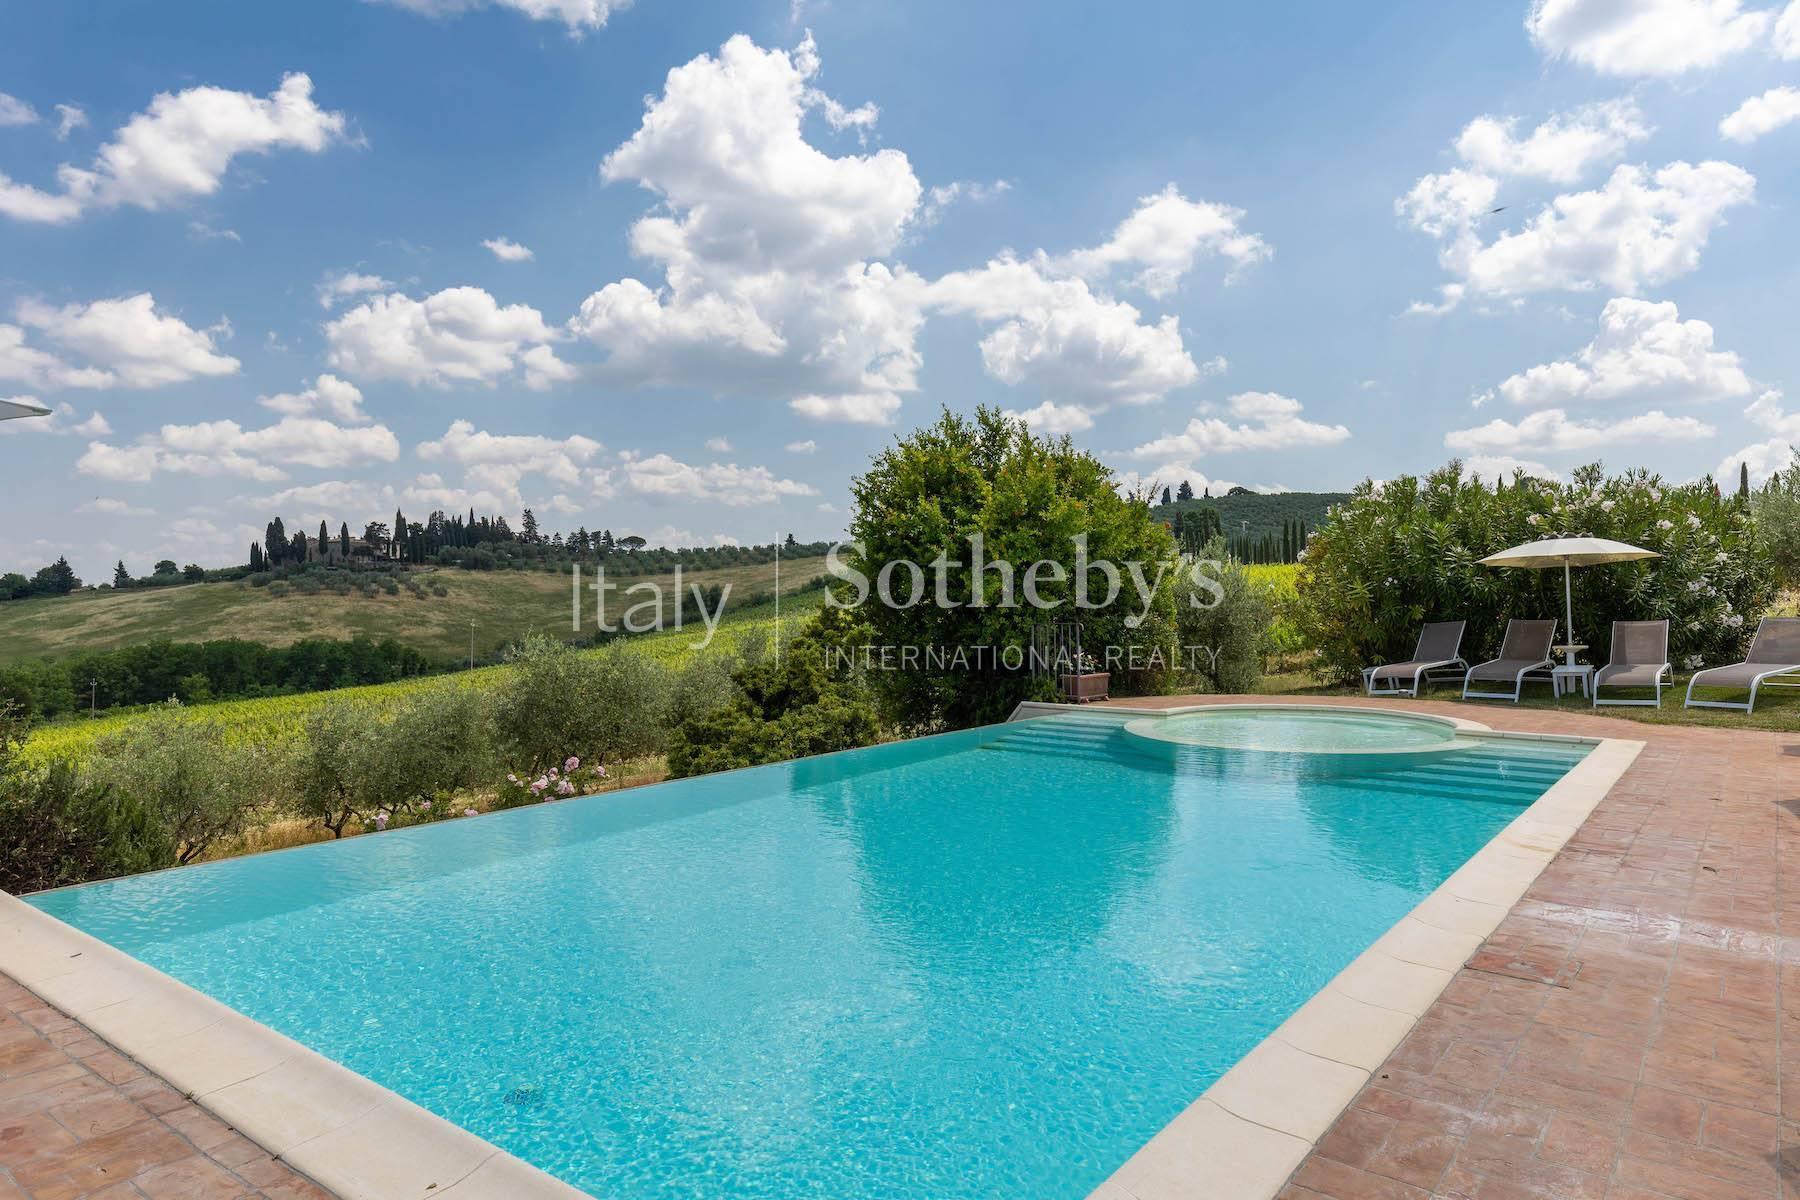 Winery with ancient country house in San gimignano - 26